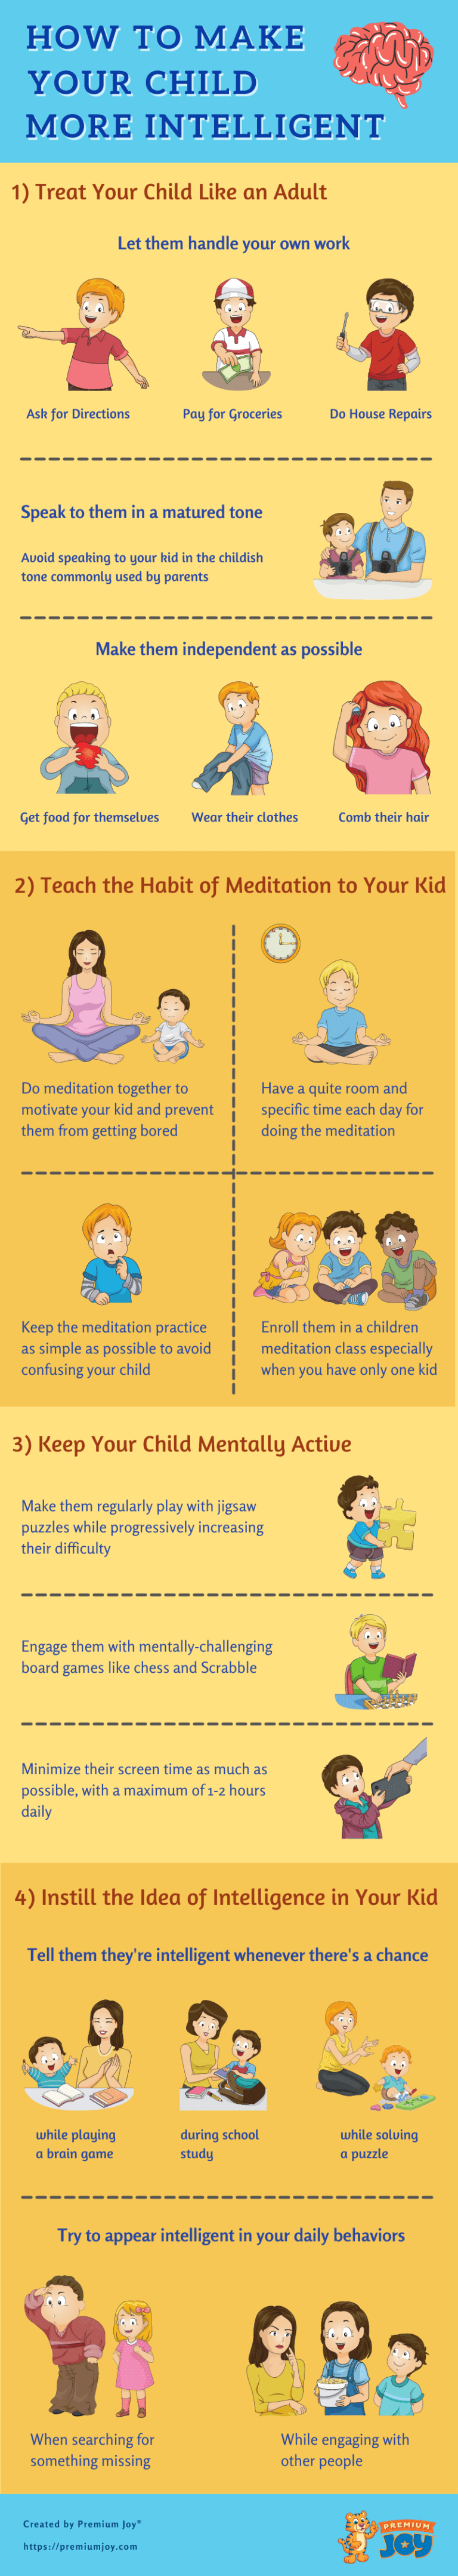 How To Make Your Child More Intelligent - e-Learning Infographics